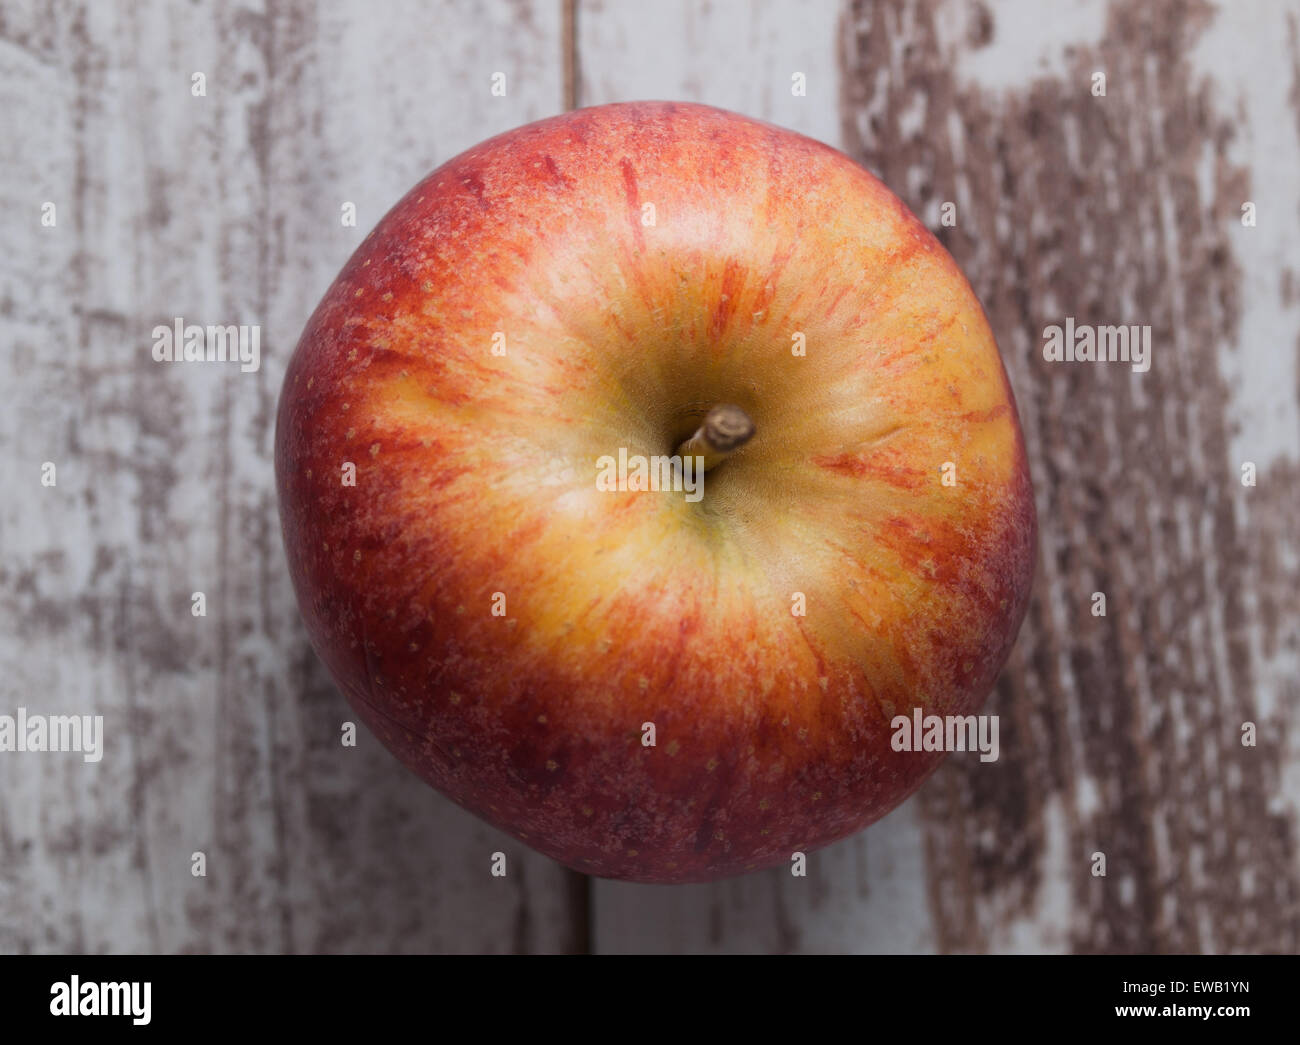 One red apple overhead over wooden background Stock Photo